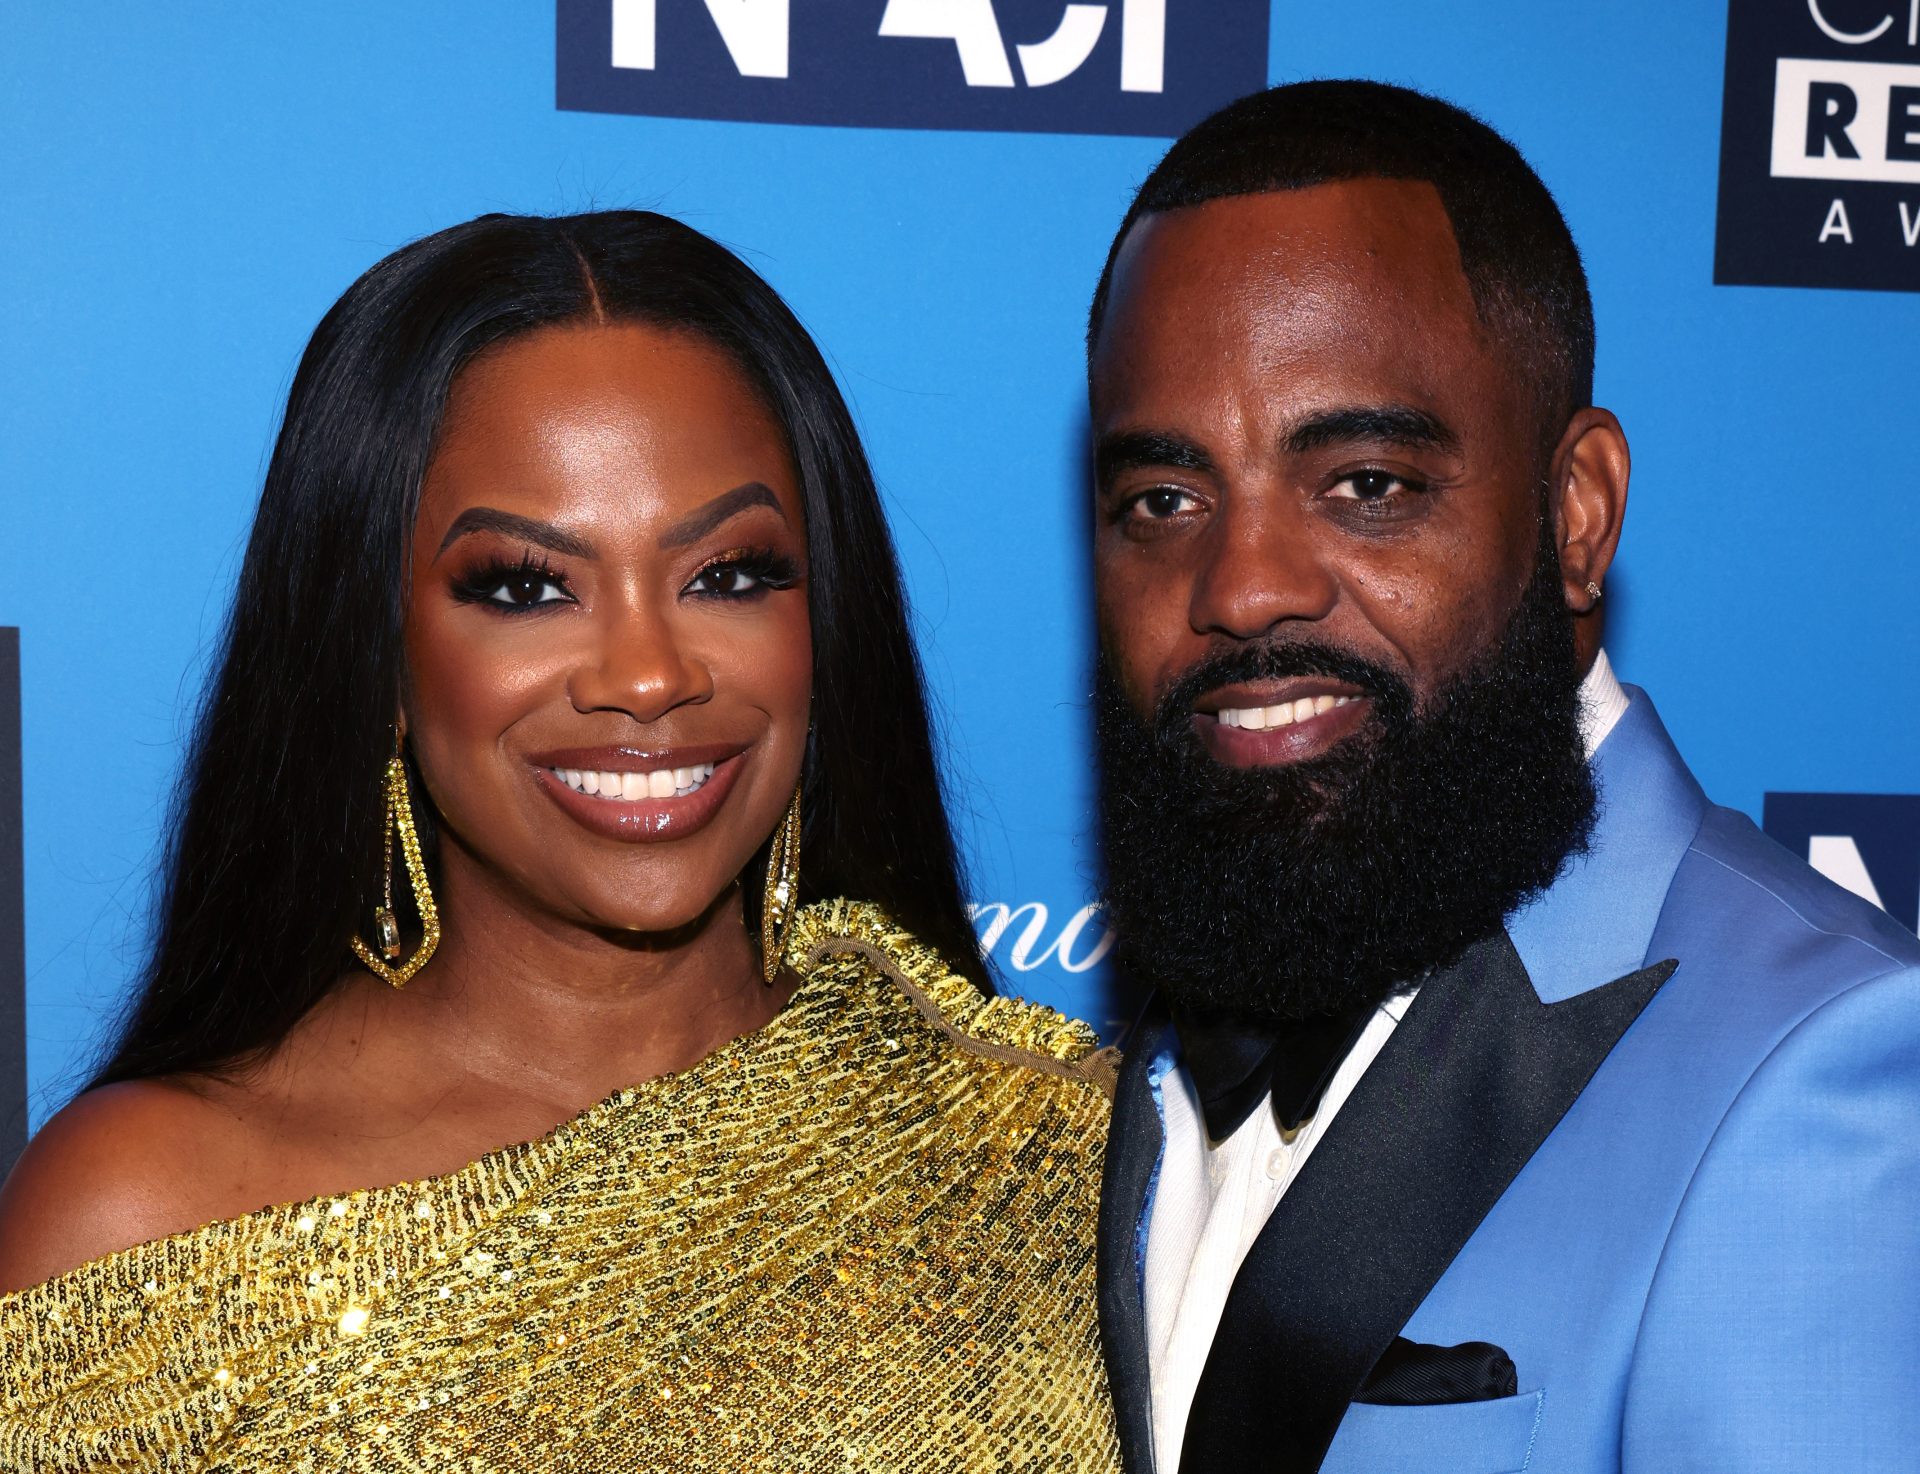 Shootout At Kandi Burruss’ Atlanta Restaurant Breaks Out Between Conflicting Co-Workers